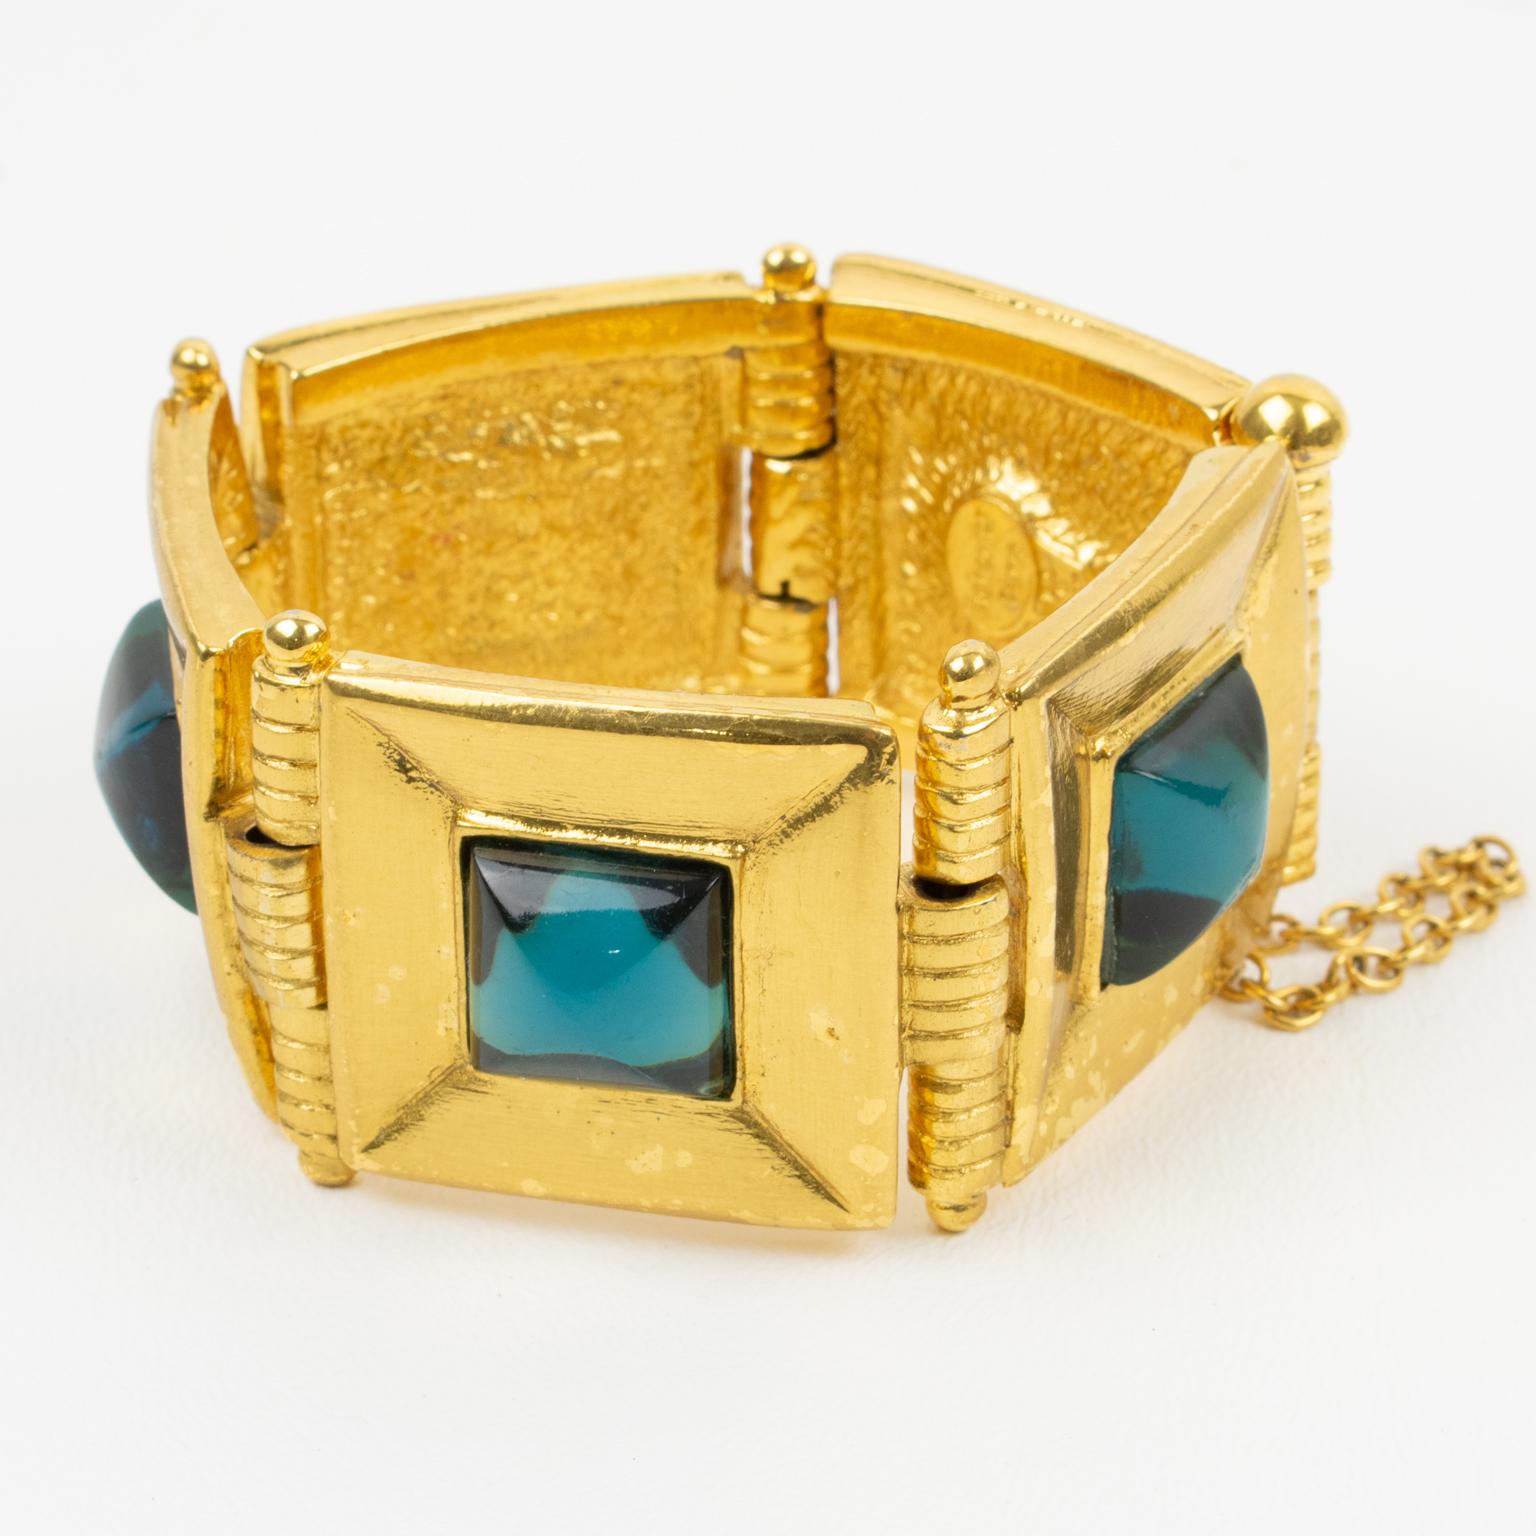 This lovely Jean Louis Scherrer Paris link bangle bracelet features a geometric shape in shiny metal ornate with resin cabochons in transparent turquoise blue color. The security chain and closing clasp are in perfect working condition. The bracelet